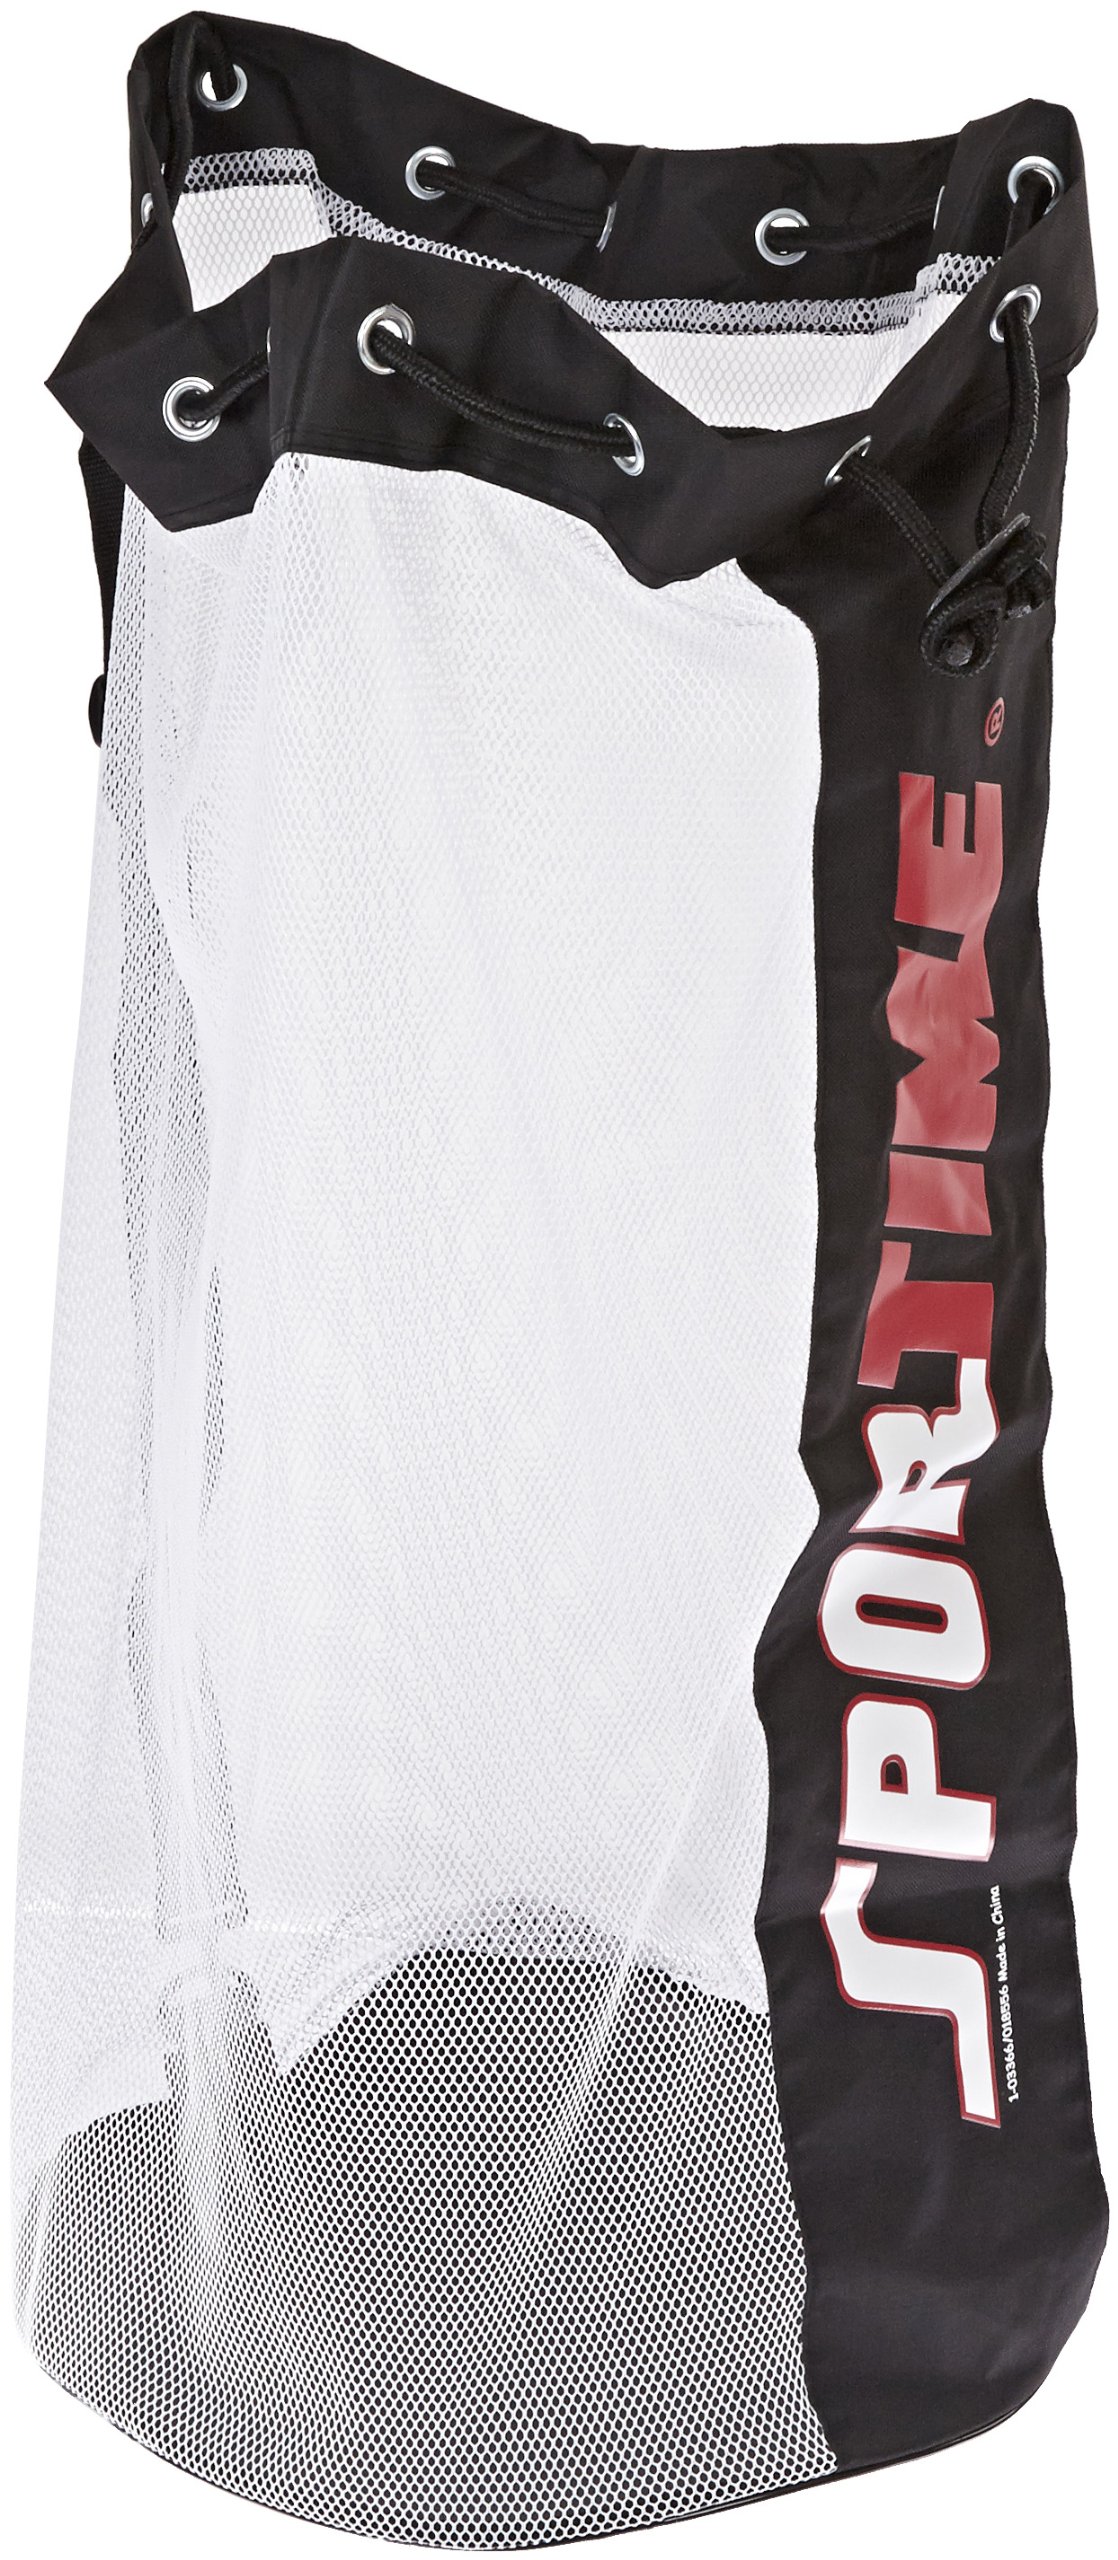 Sportime Big Mesh Bag - 18 12 x 36 inches - White and Black